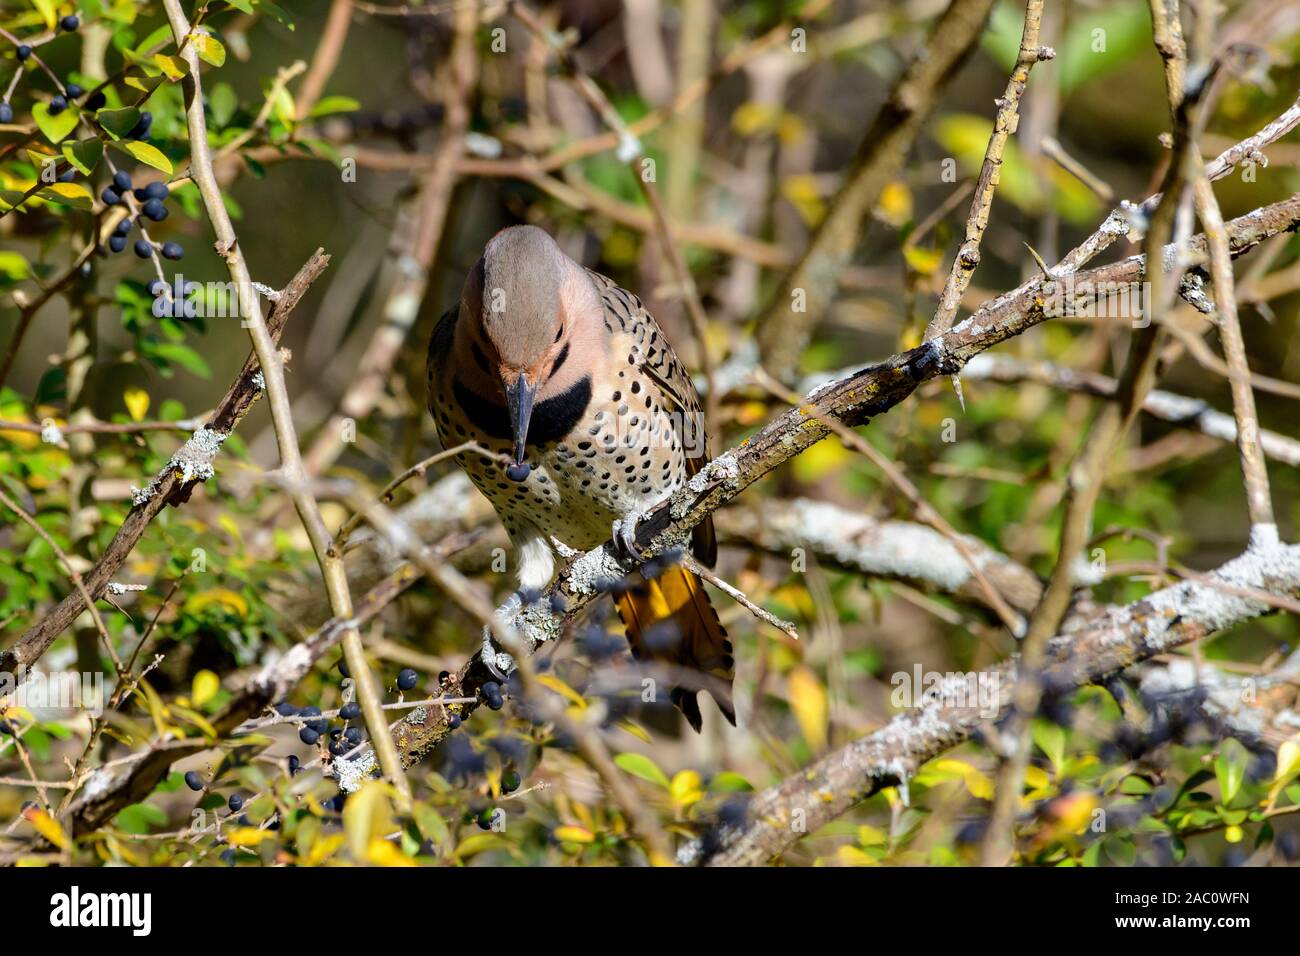 northern Flicker - Colaptes auratus - Yellow-shafted, perched on a branch detailed close-up Stock Photo